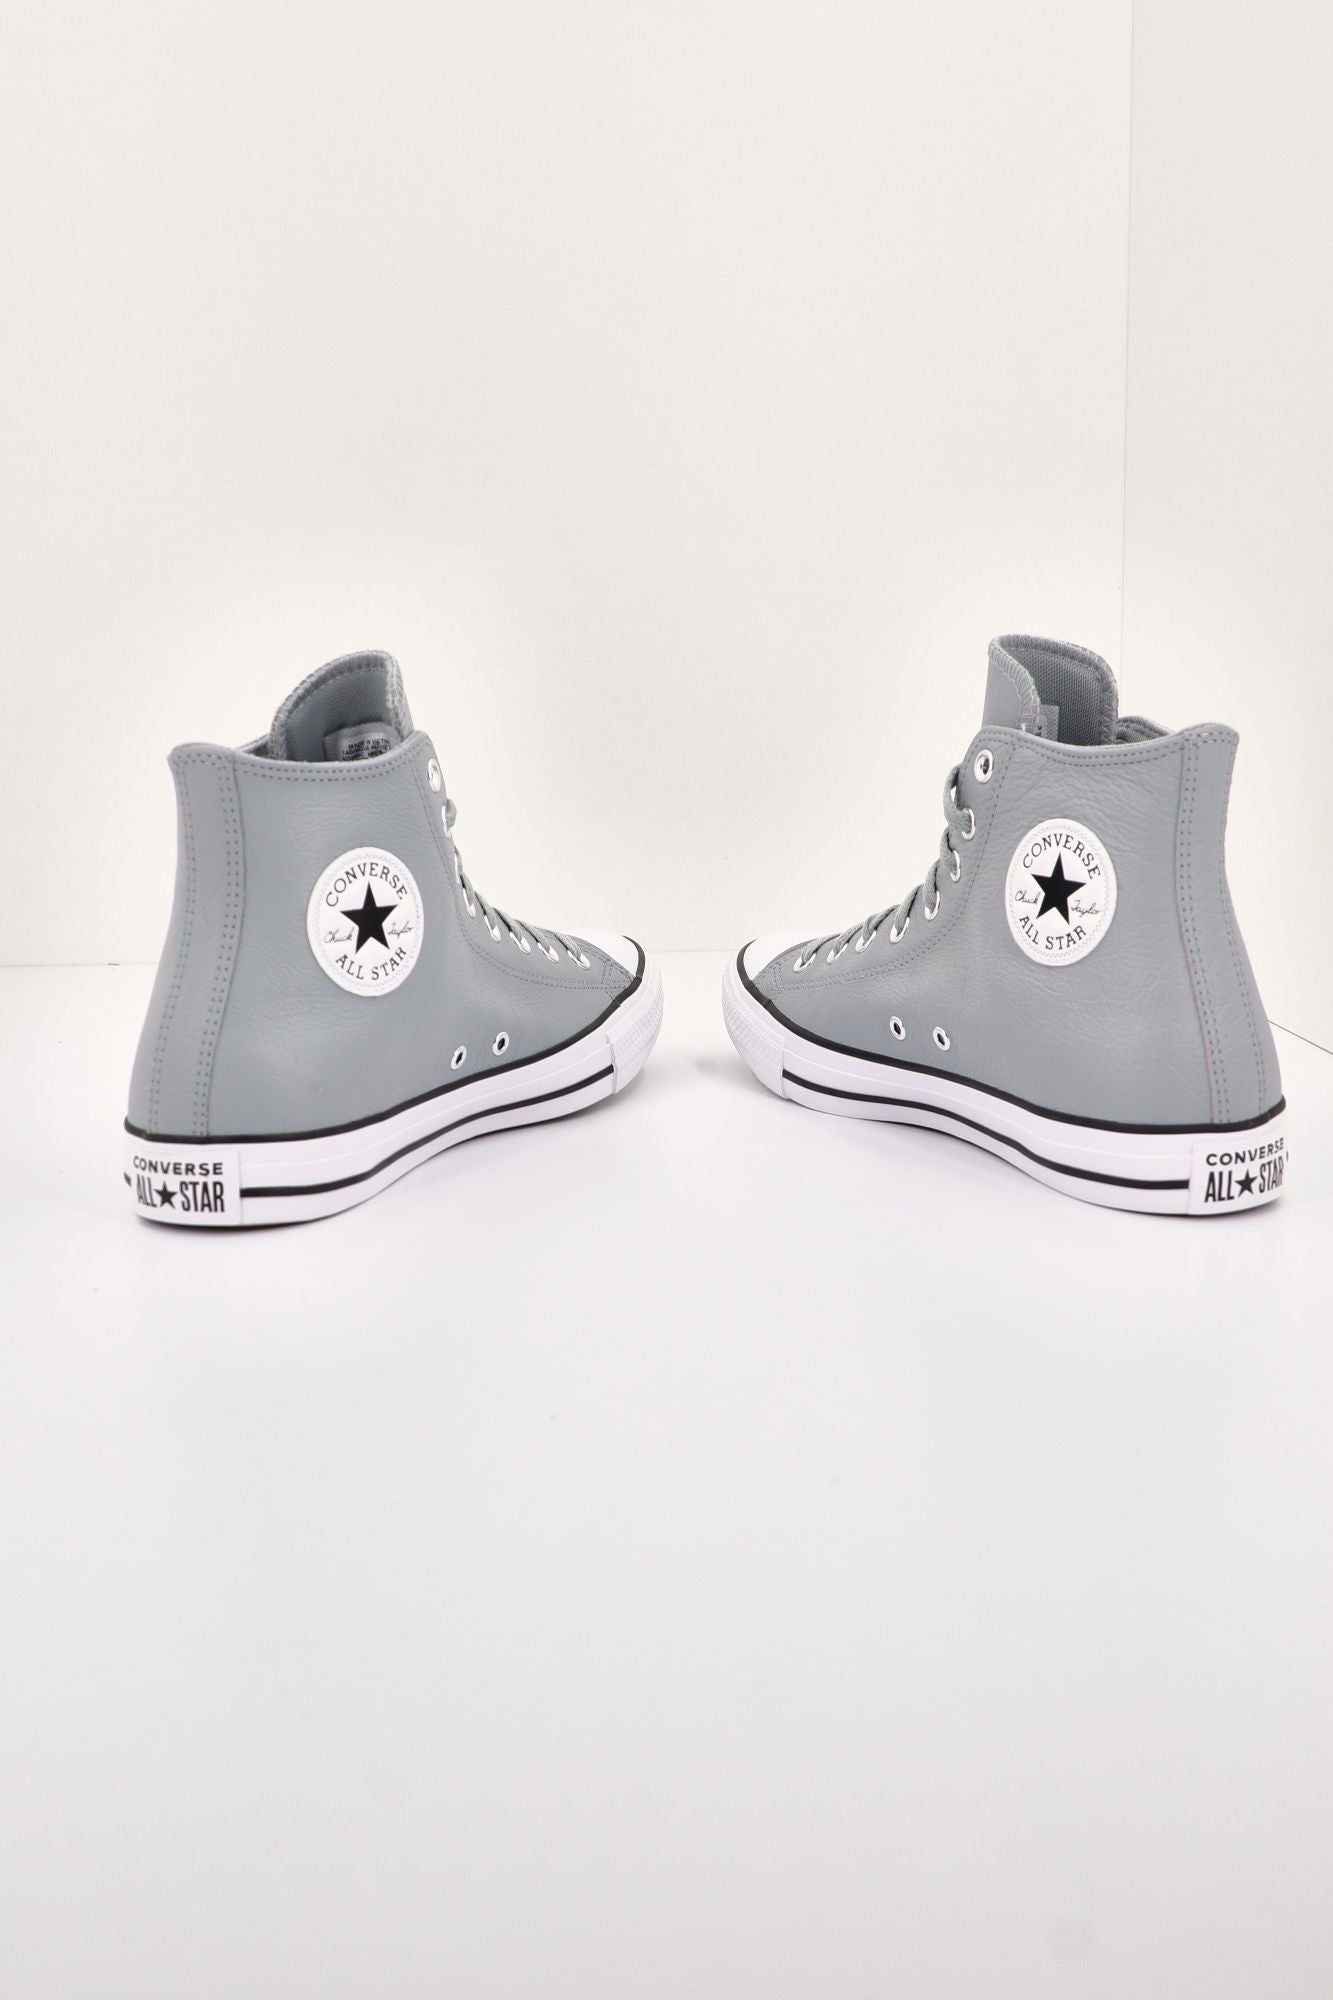 CONVERSE CHUCK TAYLOR ALL STAR TUMBLED LEATHER en color GRIS (3)